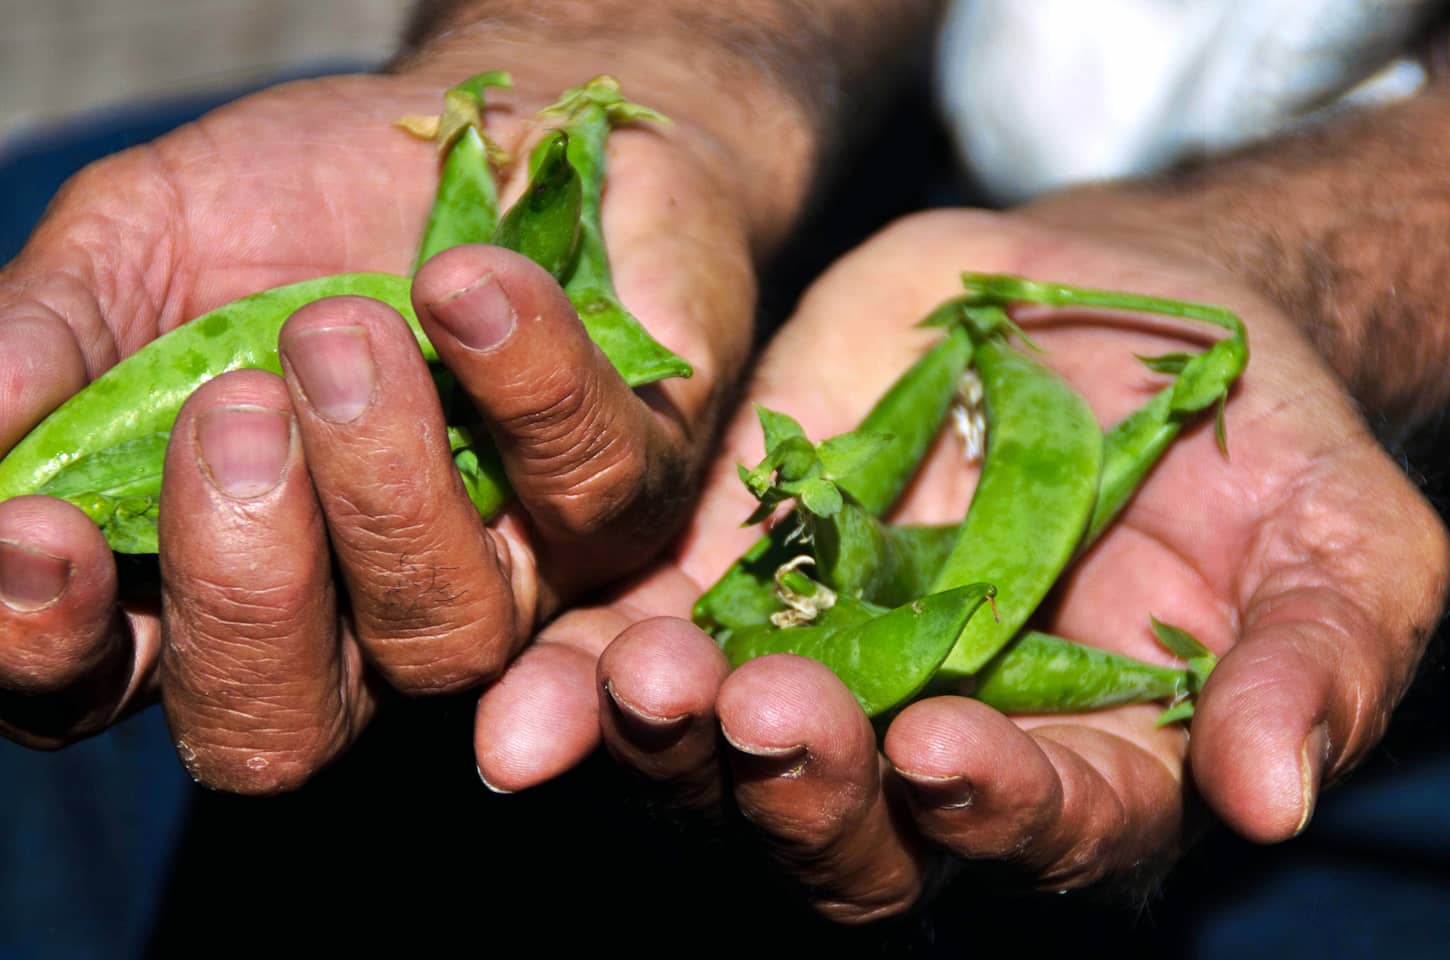 An image of a Farm worker holding freshly picked green snap peas in his hands.